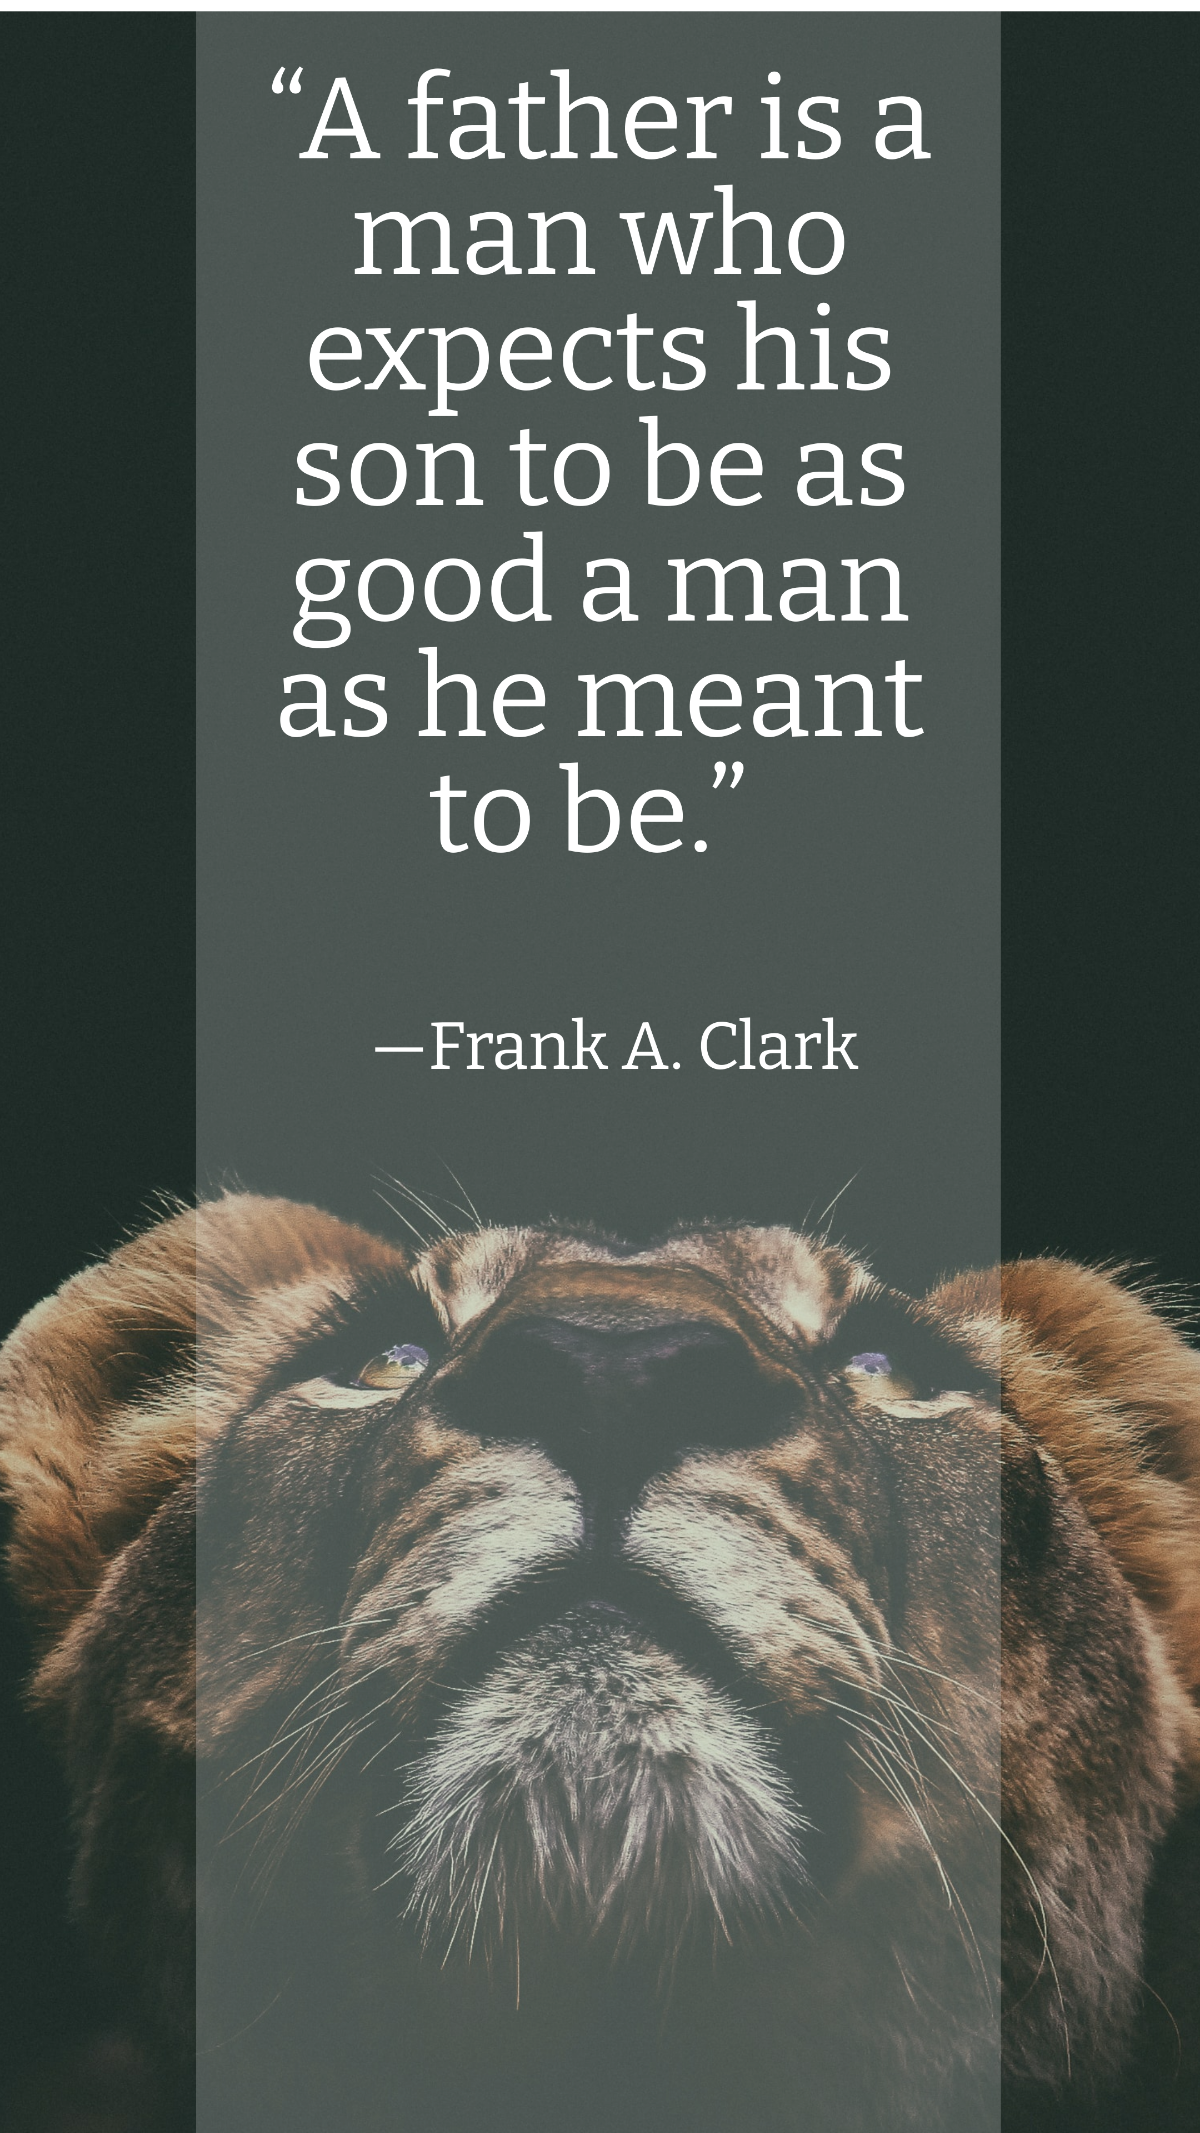 Frank A. Clark - “A father is a man who expects his son to be as good a man as he meant to be.”  Template